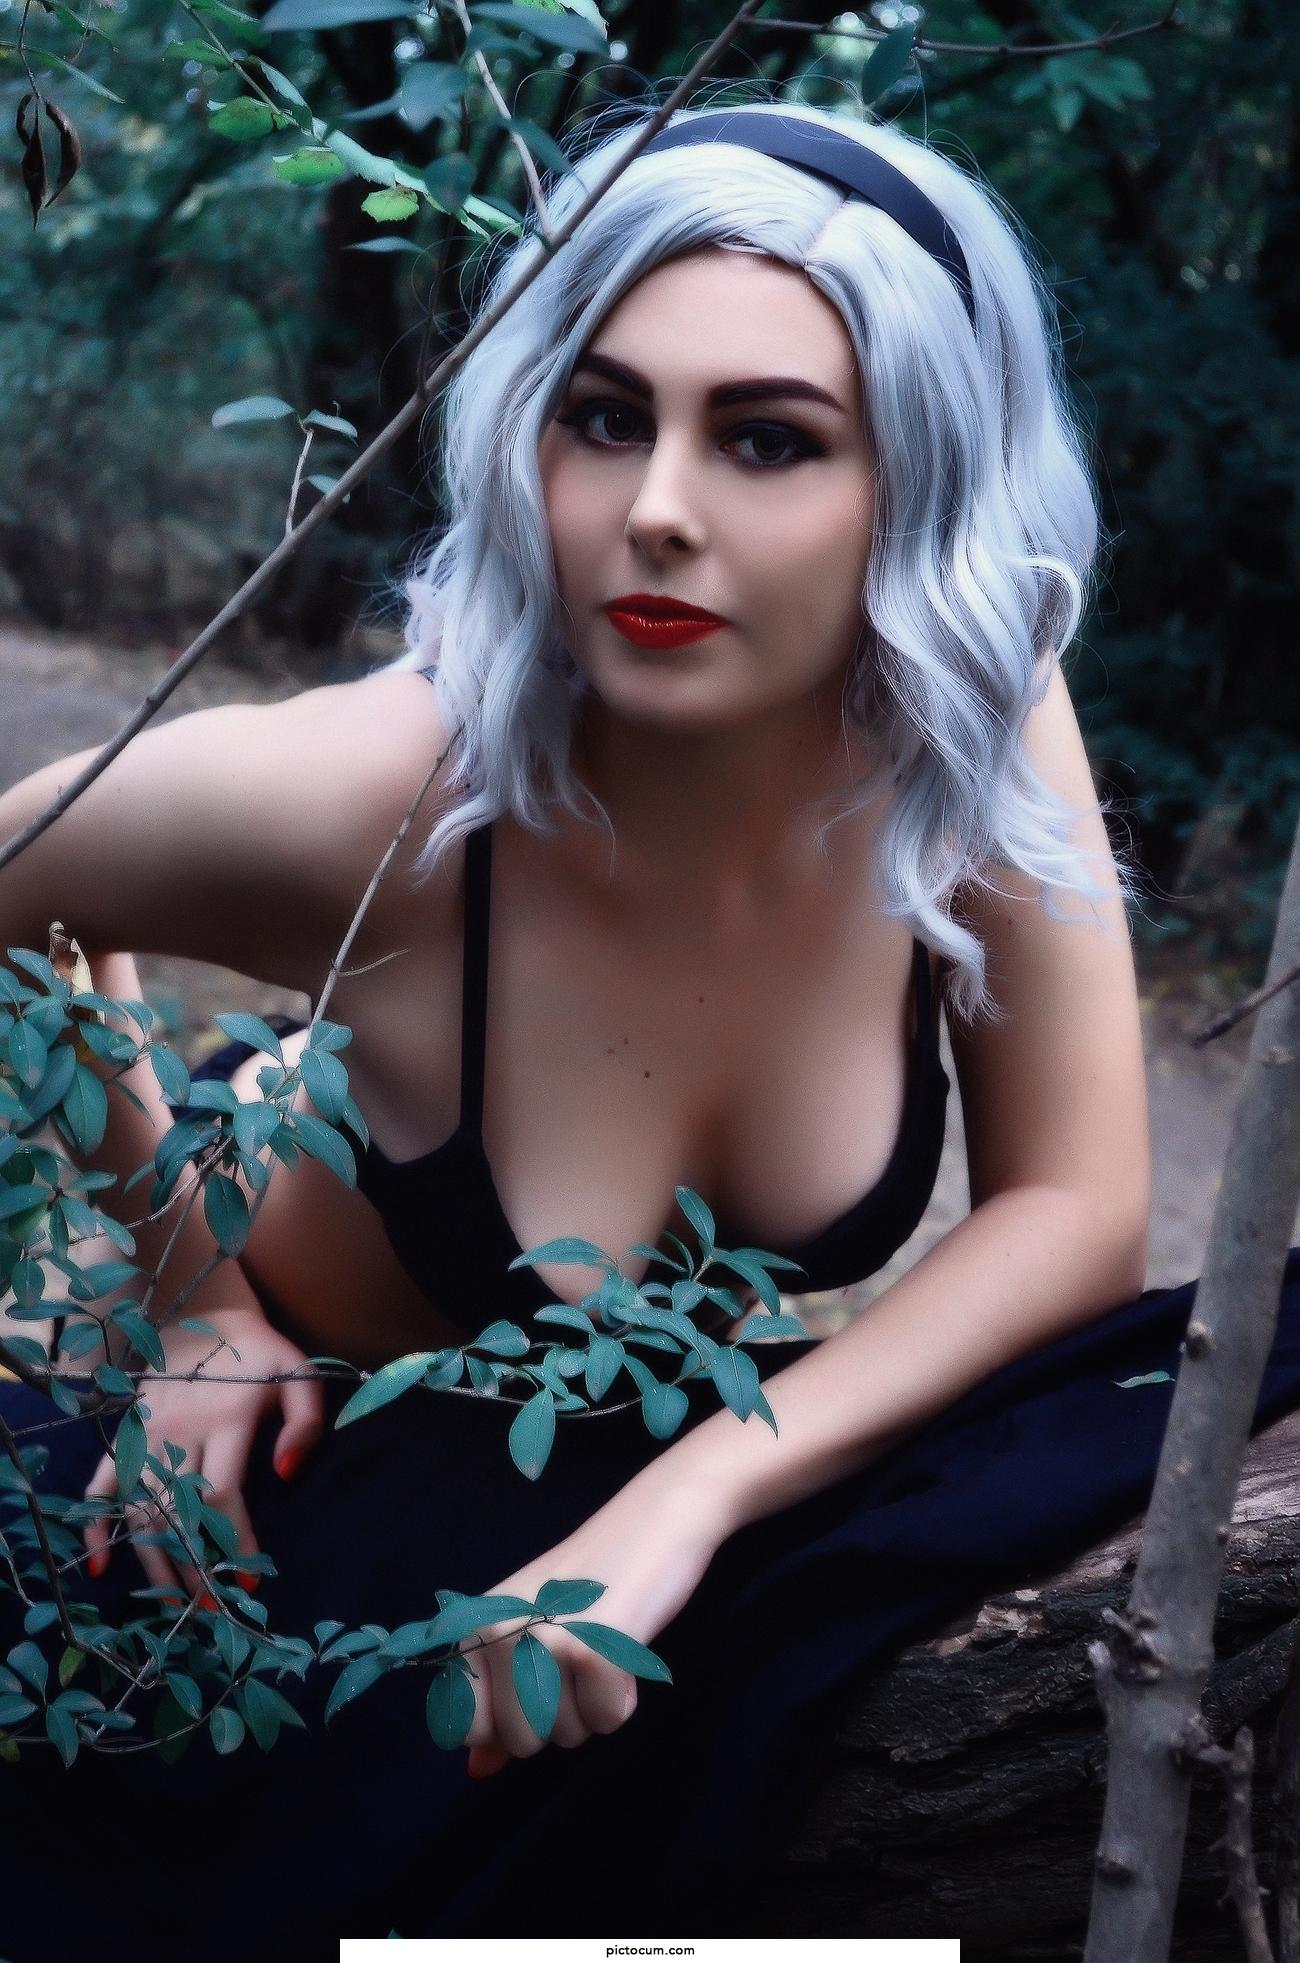 Chilling adventures of Sabrina cosplay by u/RikuNedzumi on my onlyfans page